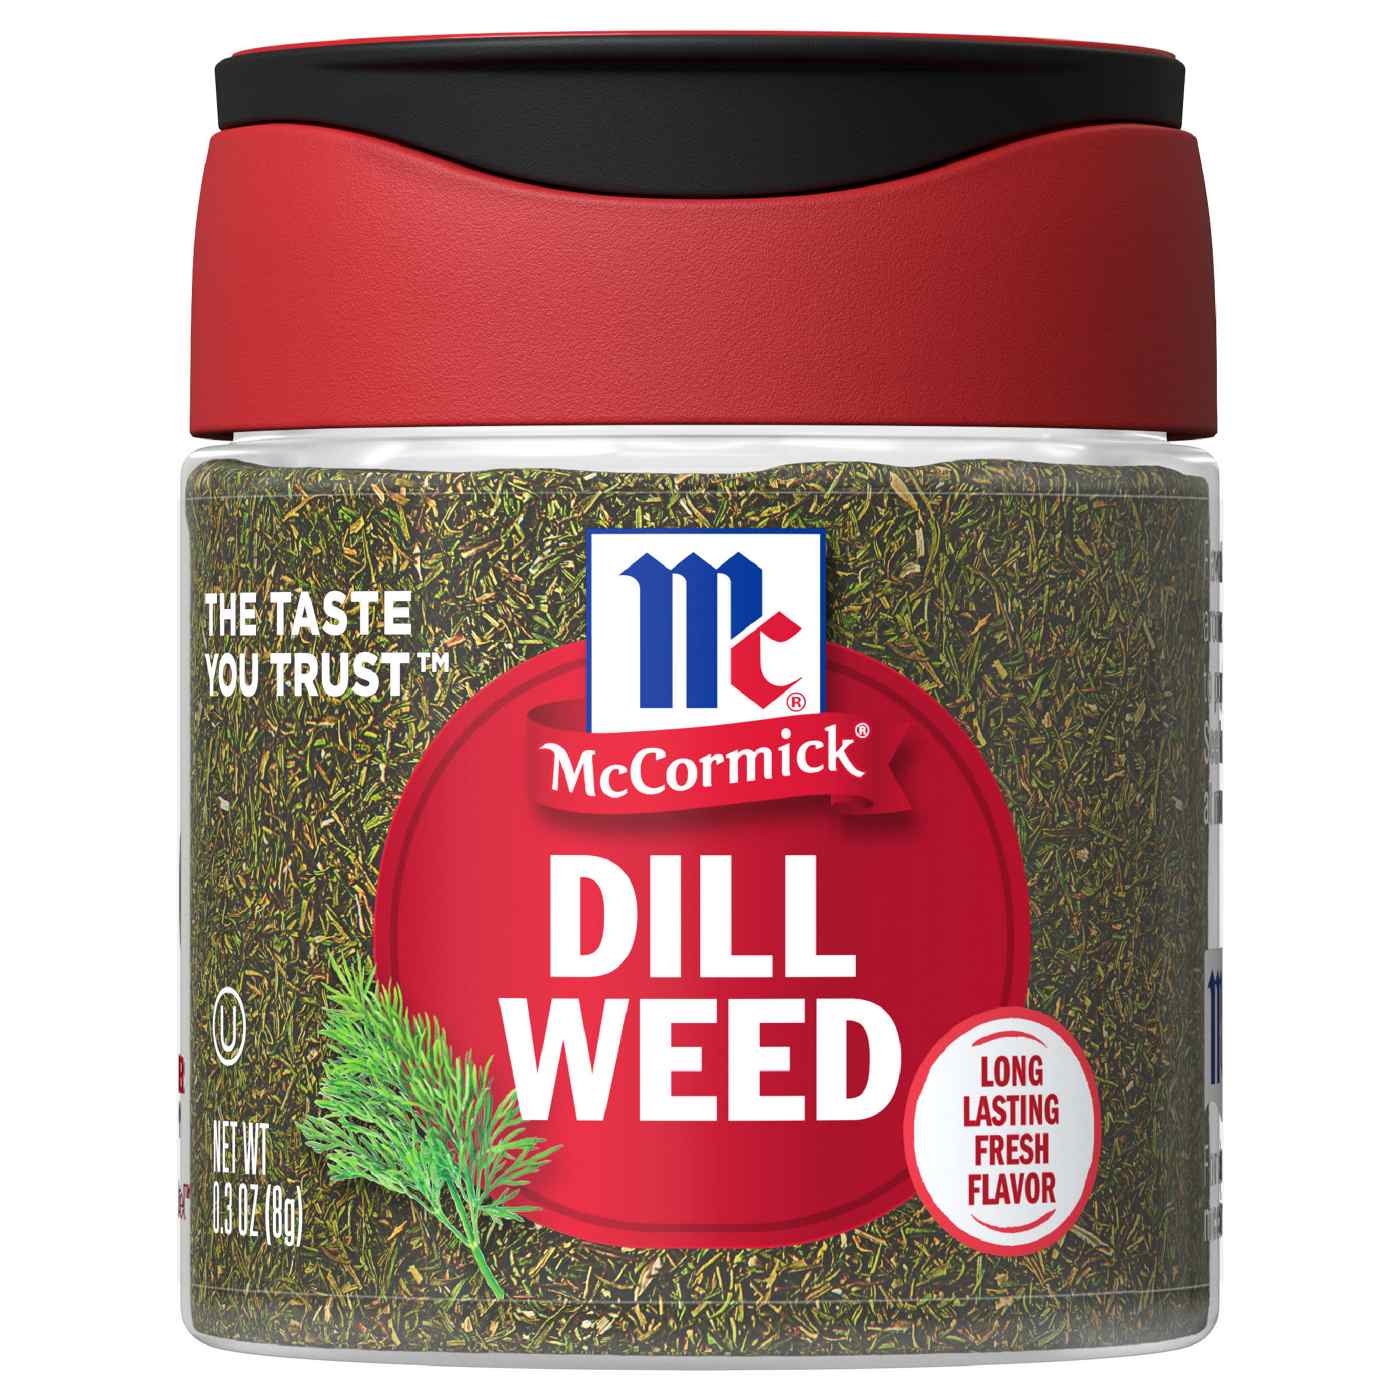 McCormick Dill Weed; image 1 of 8